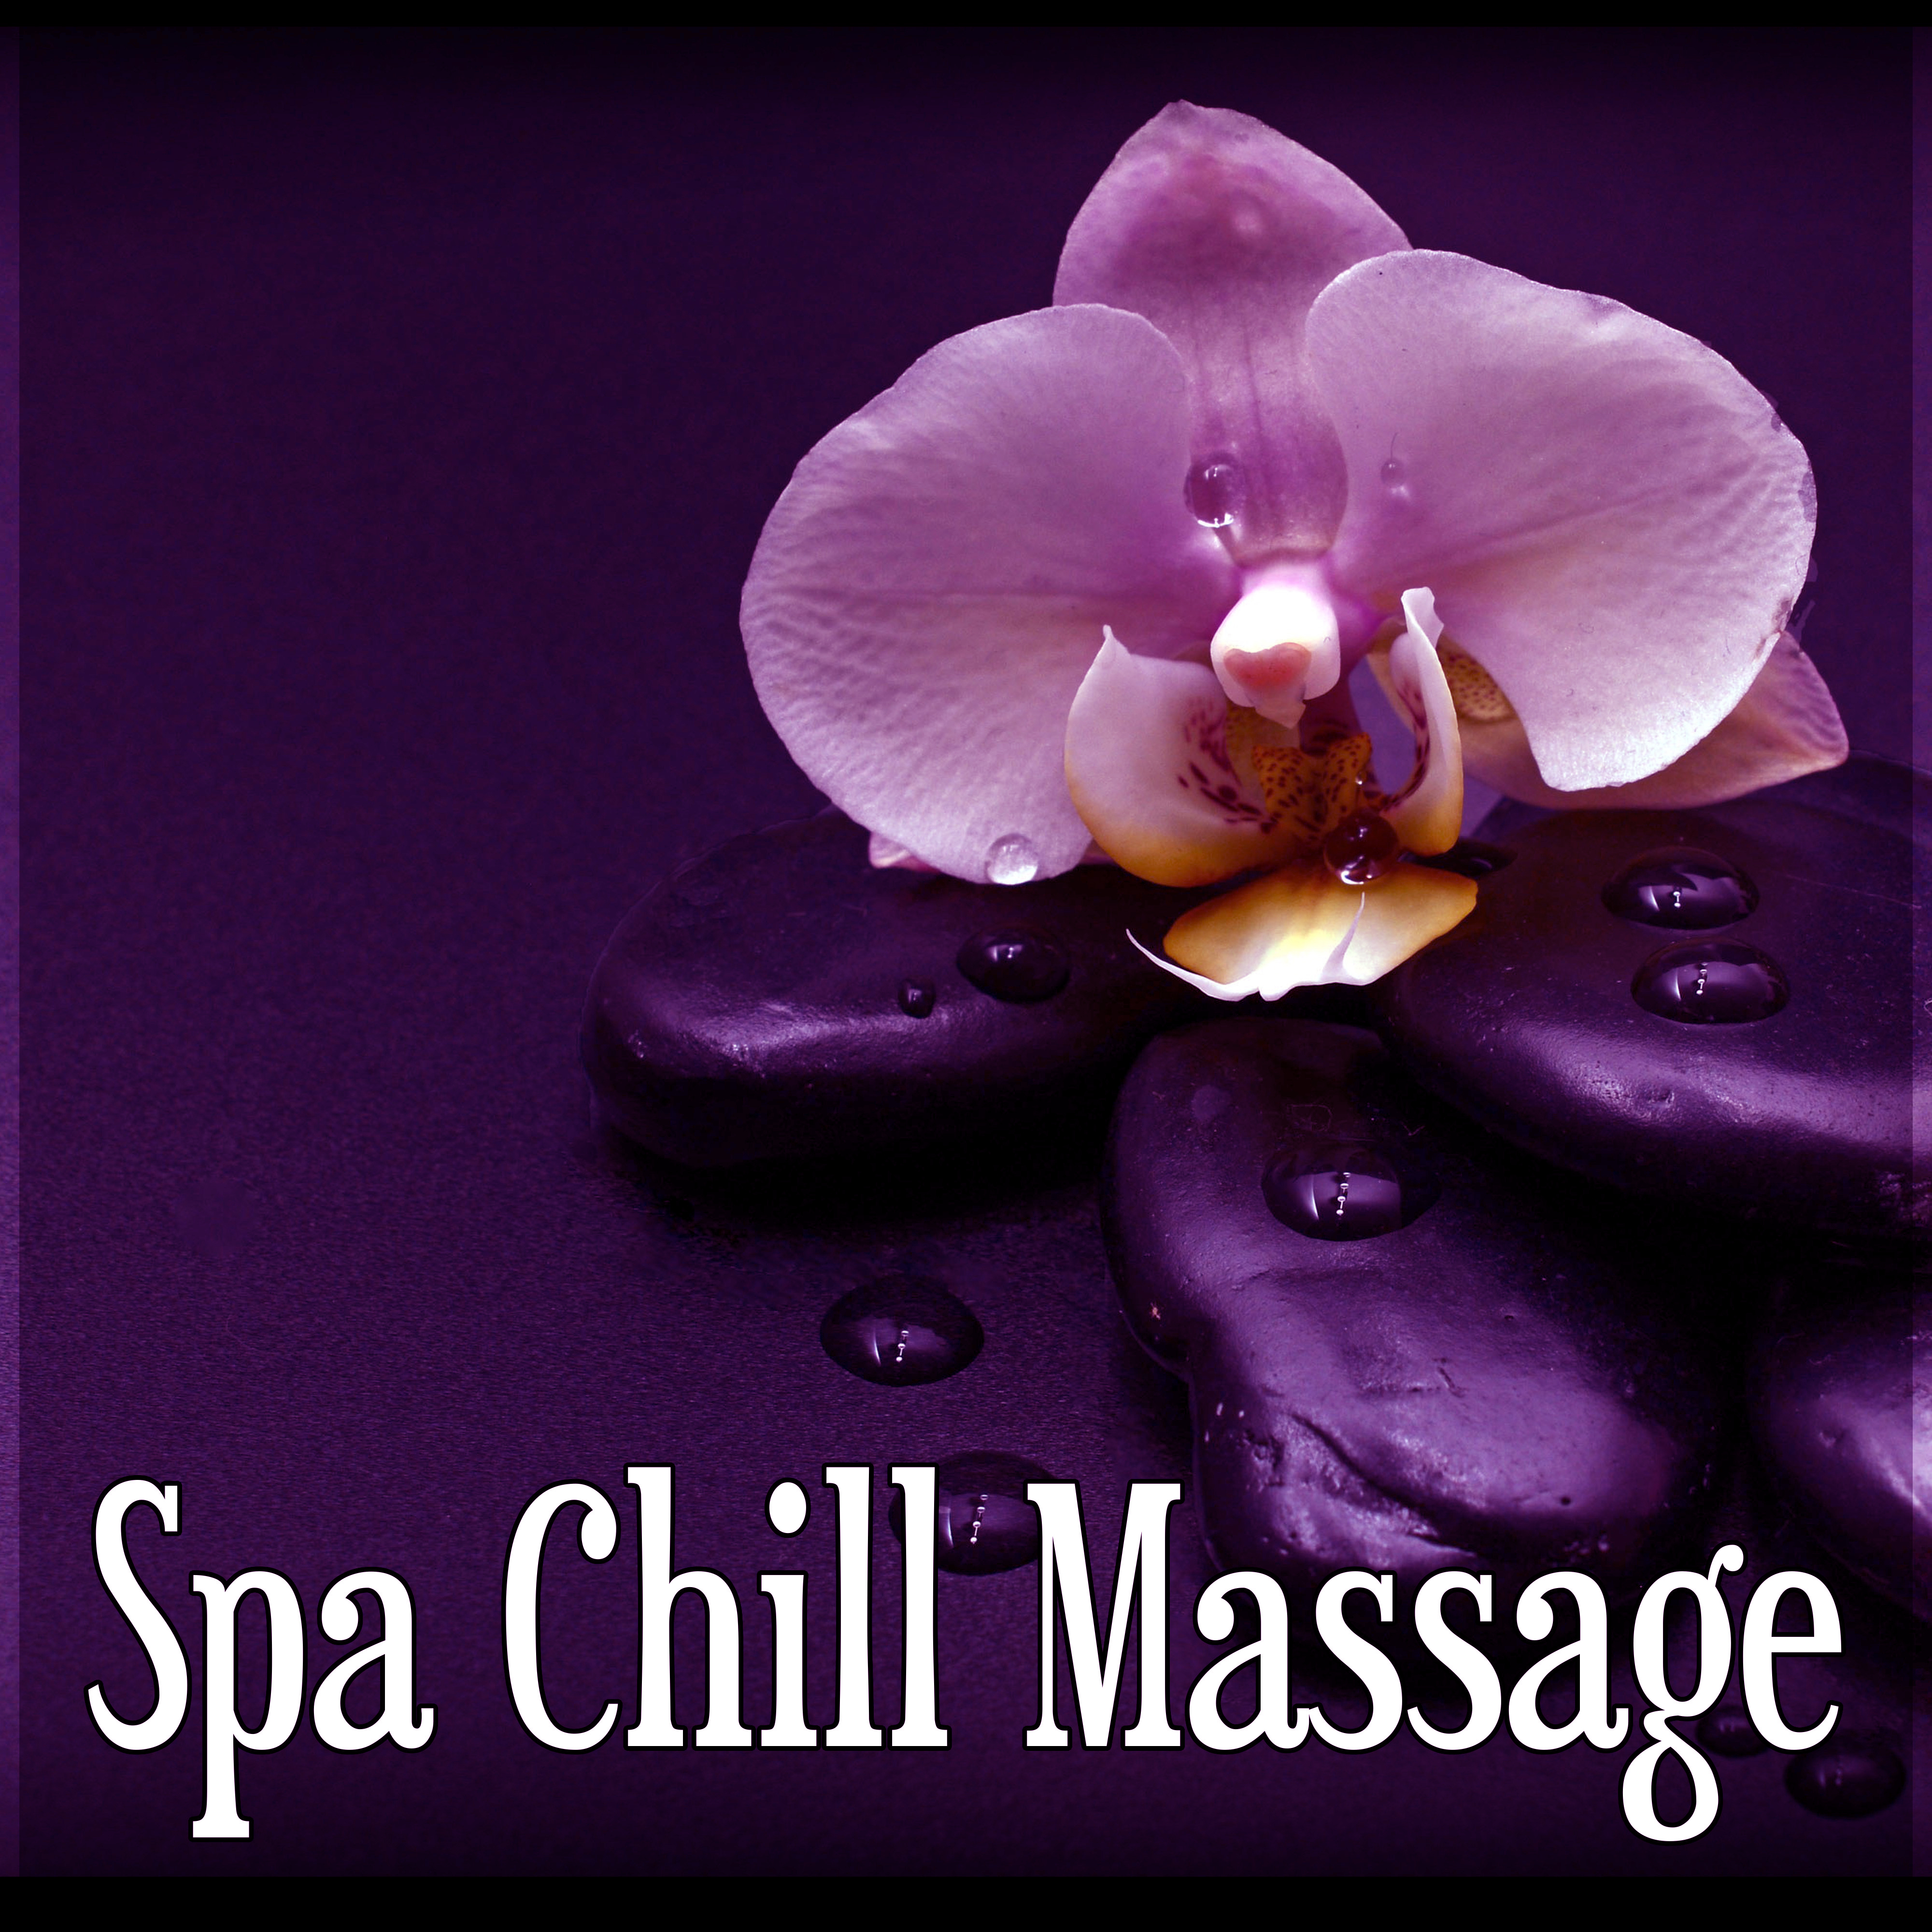 Spa Chill Massage – Spa Massage Moments, Calm Sounds to Relax, Instrumental Music with Nature Sounds for Massage Therapy, Beautiful Songs for Intimate Moments